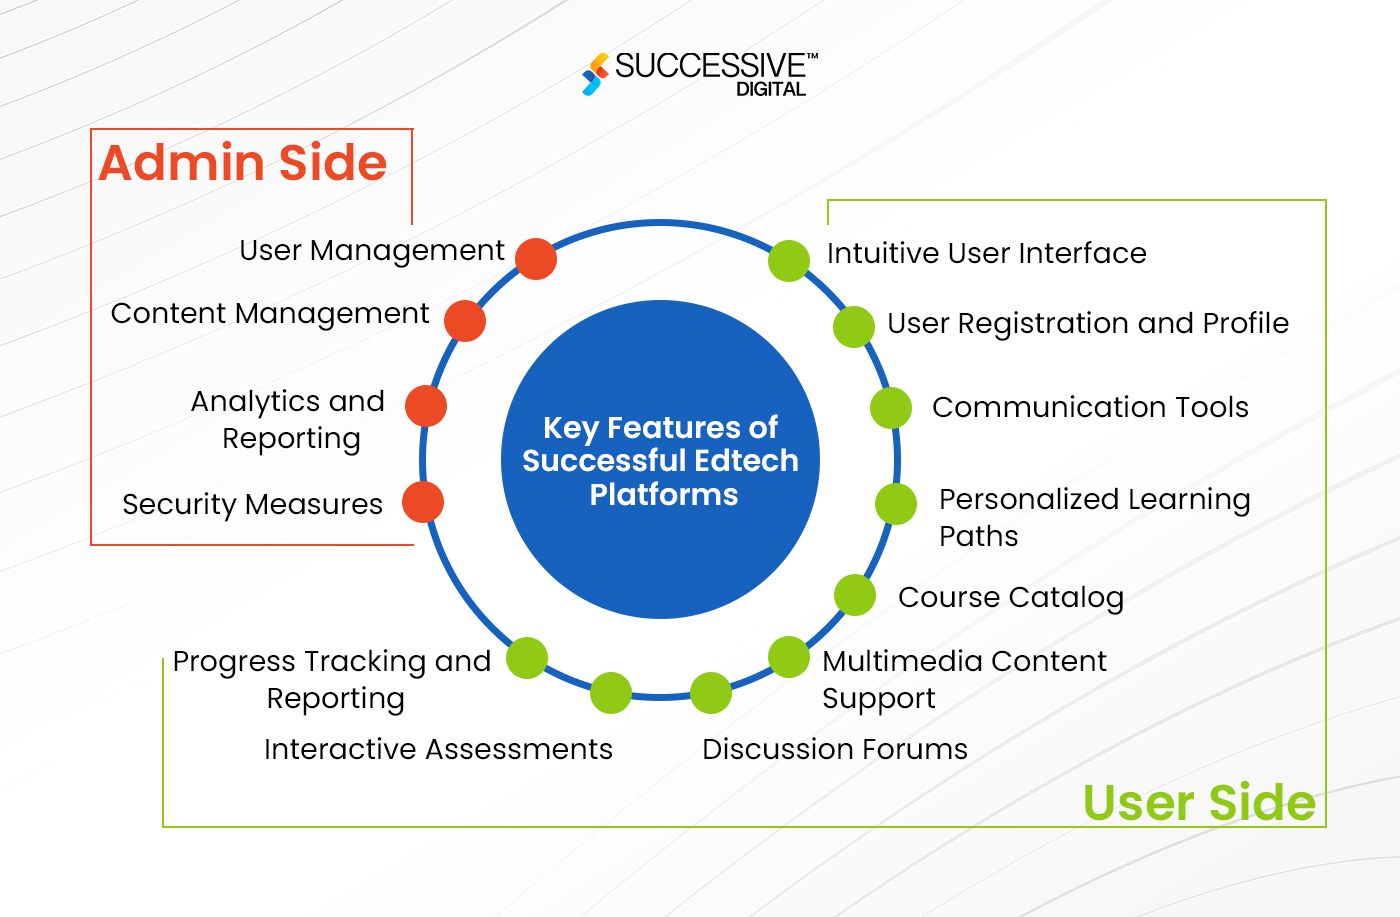 Key Features of Successful Edtech Platforms